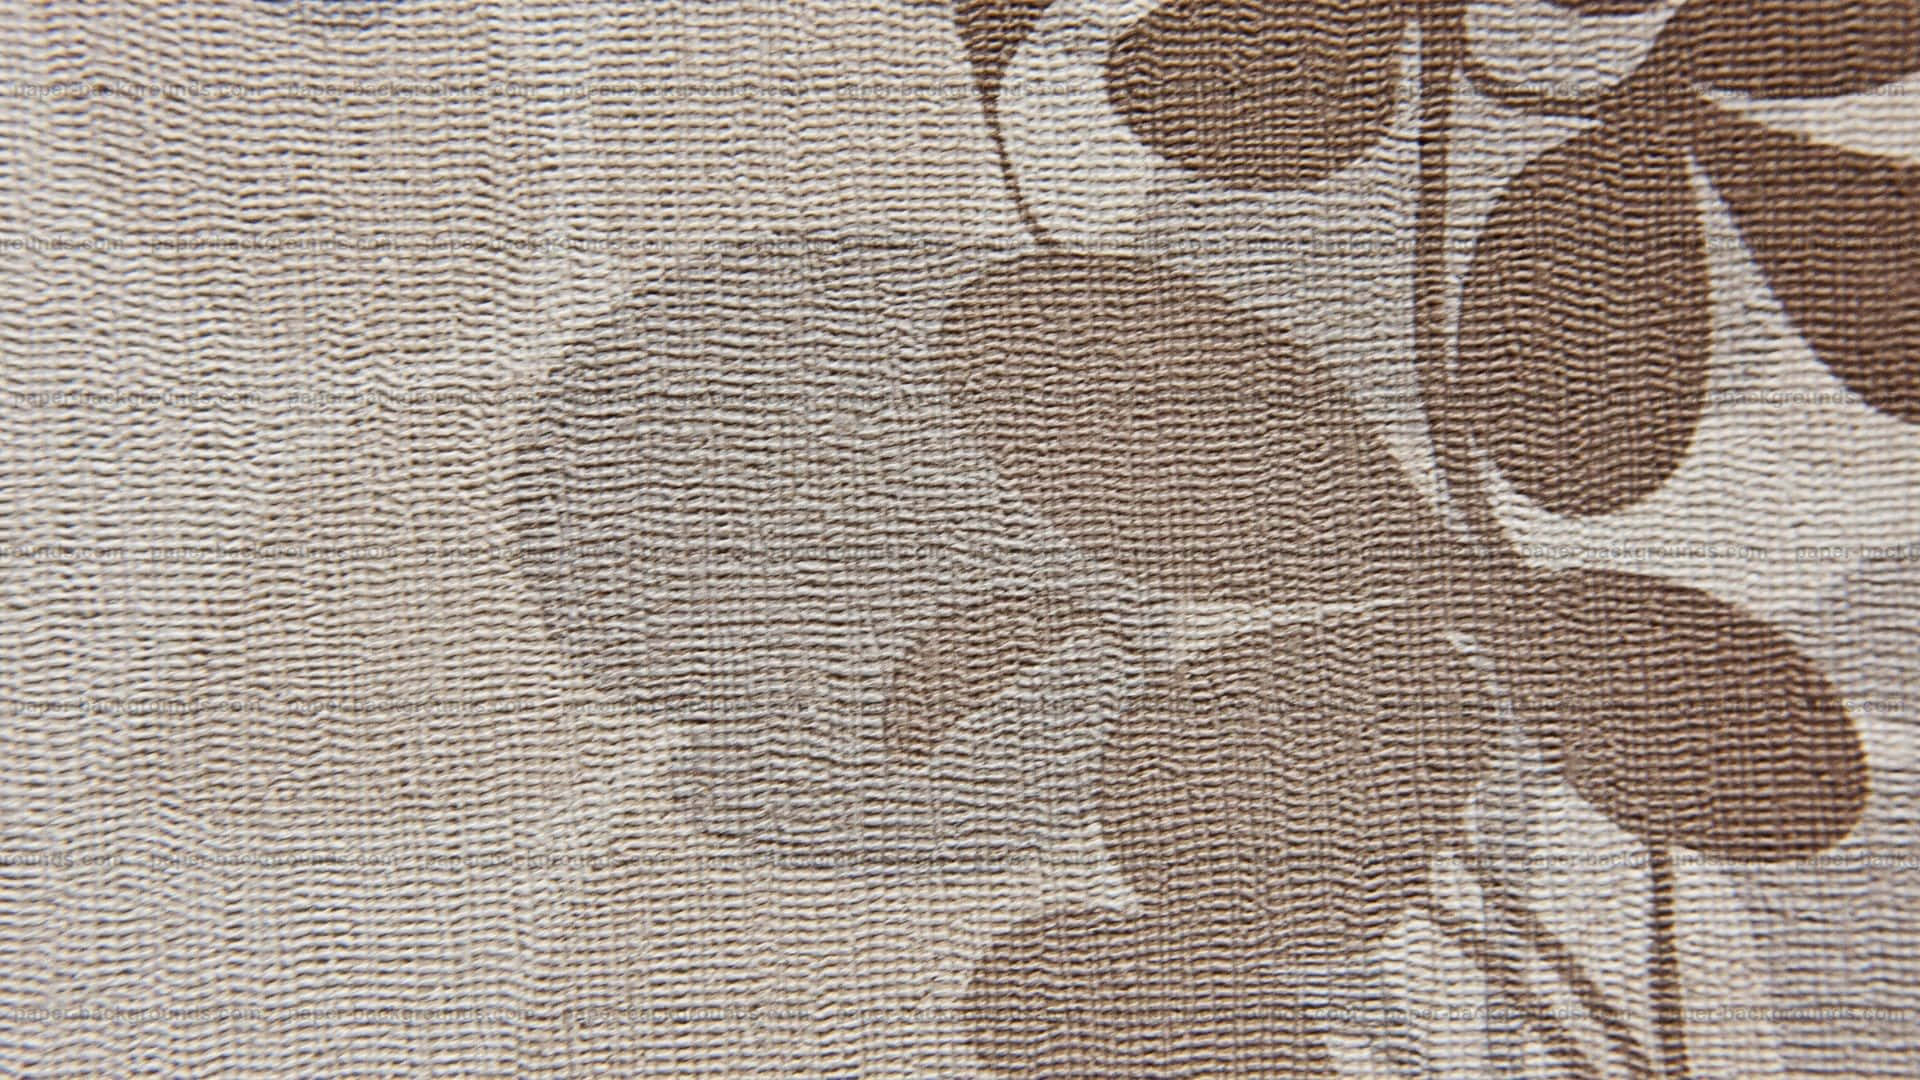 Abstract swirls of brown and white create a tranquil design Wallpaper